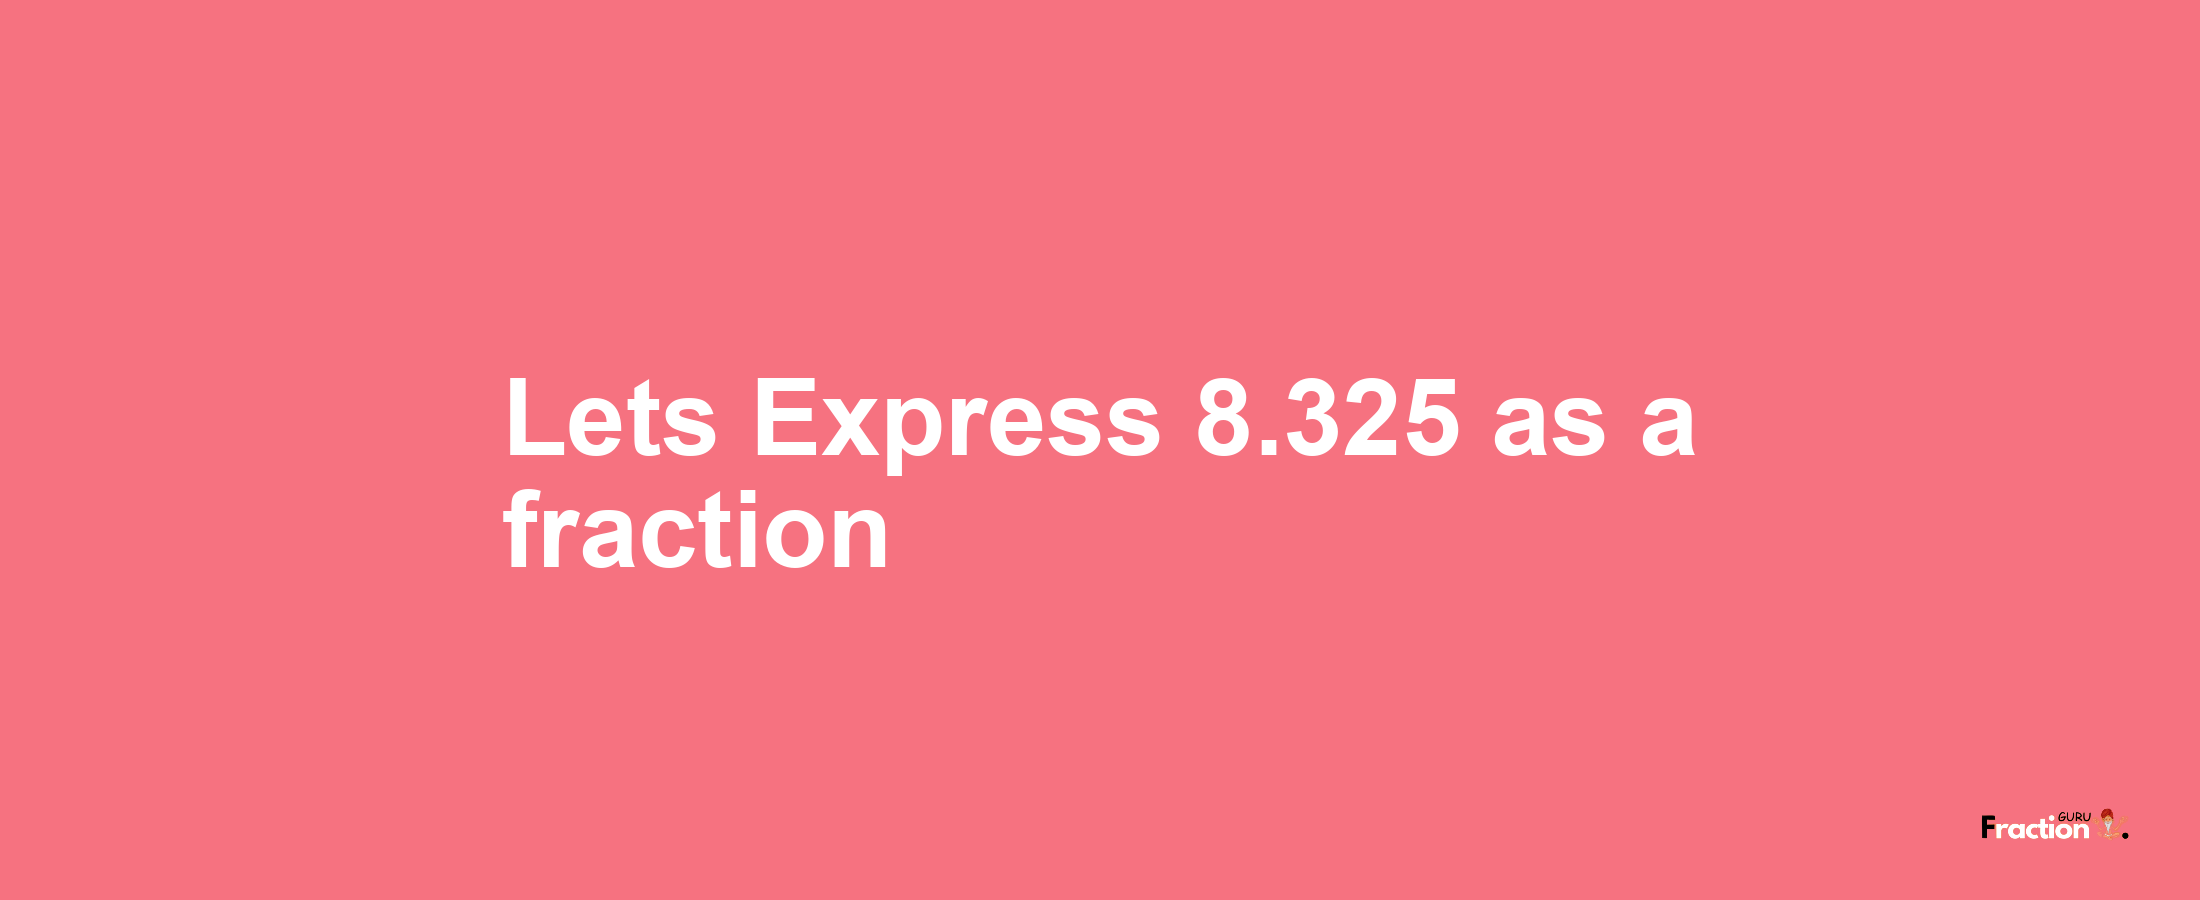 Lets Express 8.325 as afraction